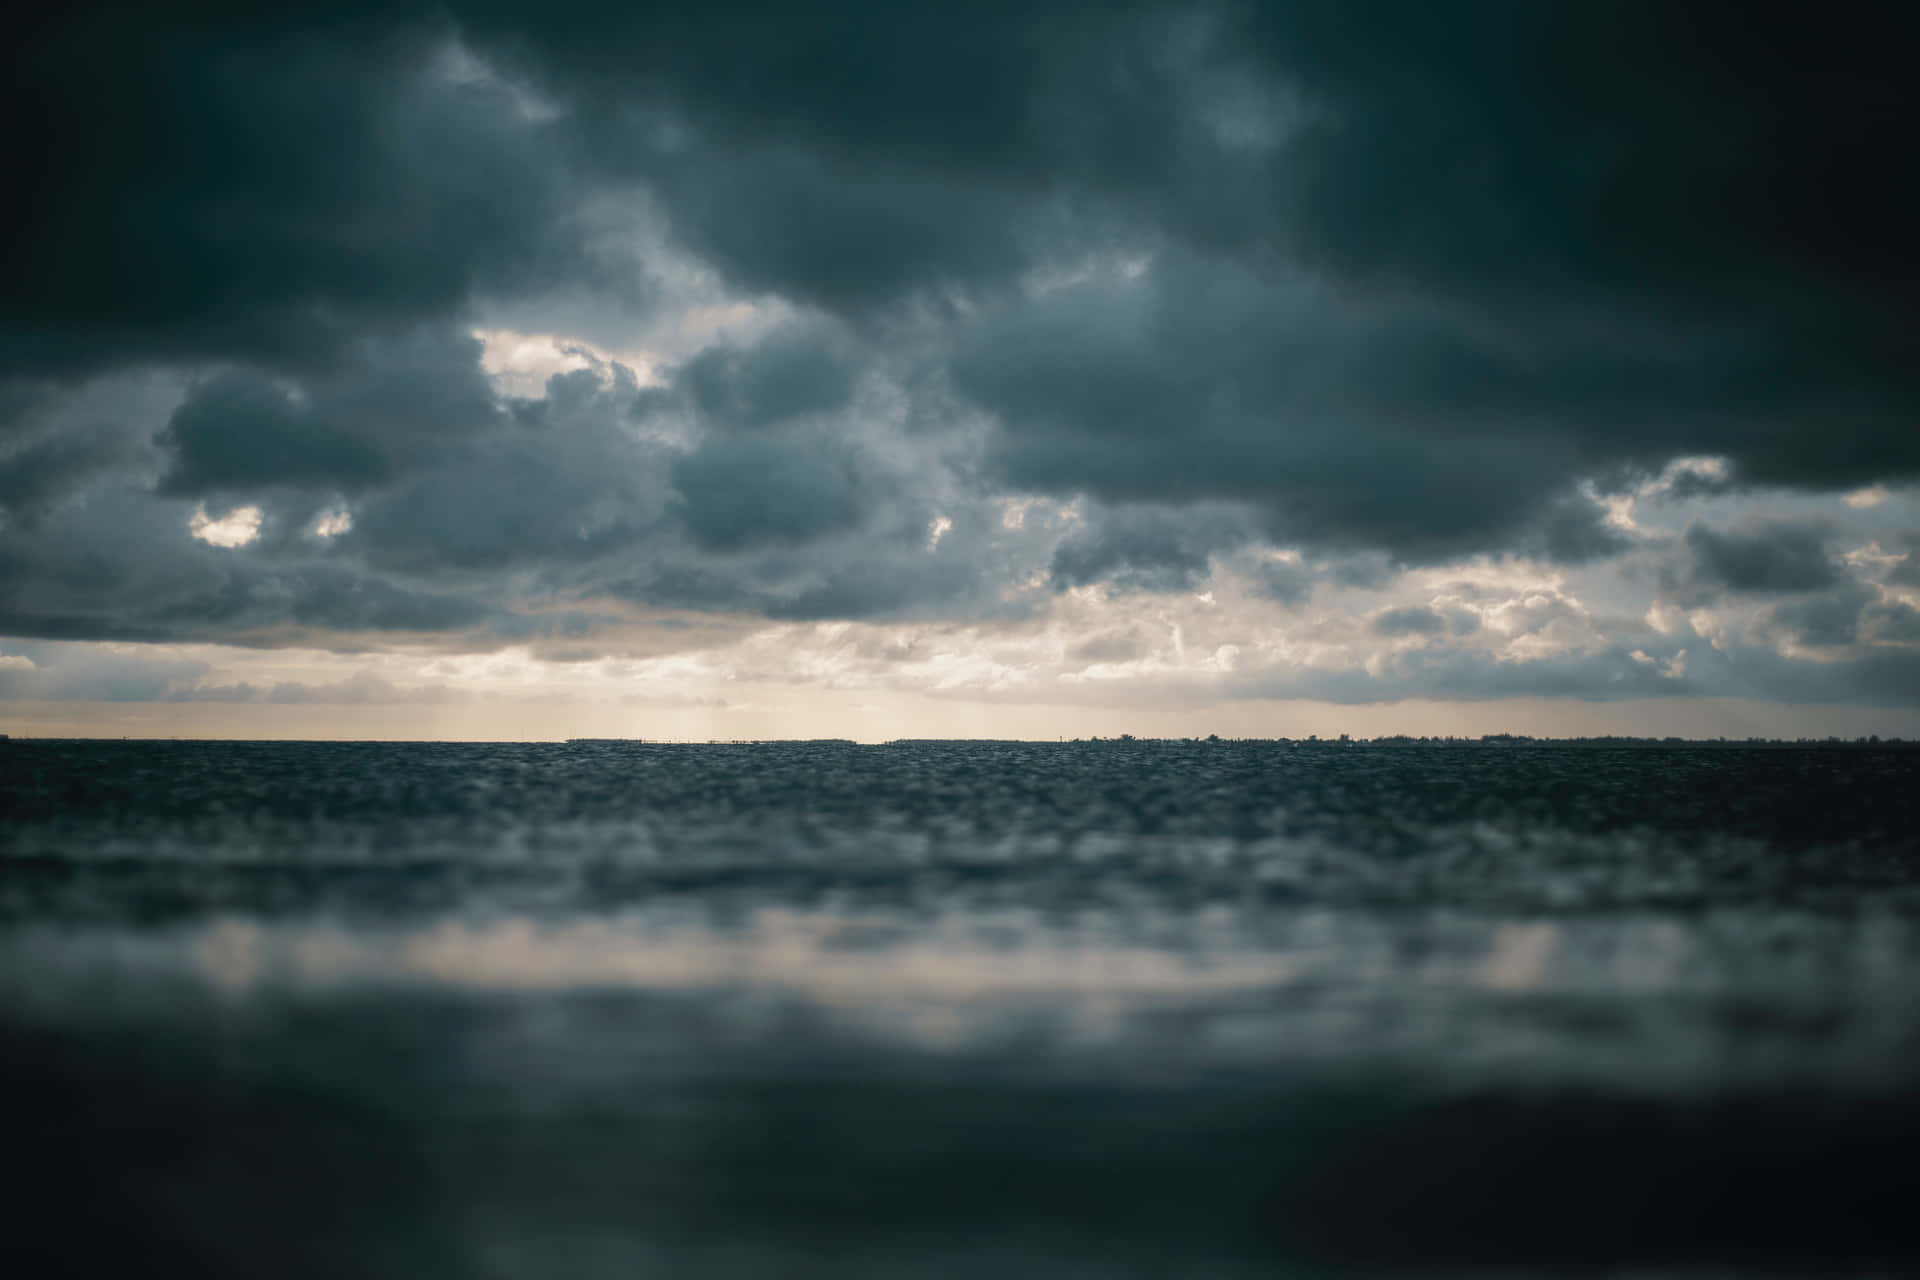 a dark sky over the ocean with a boat in the background